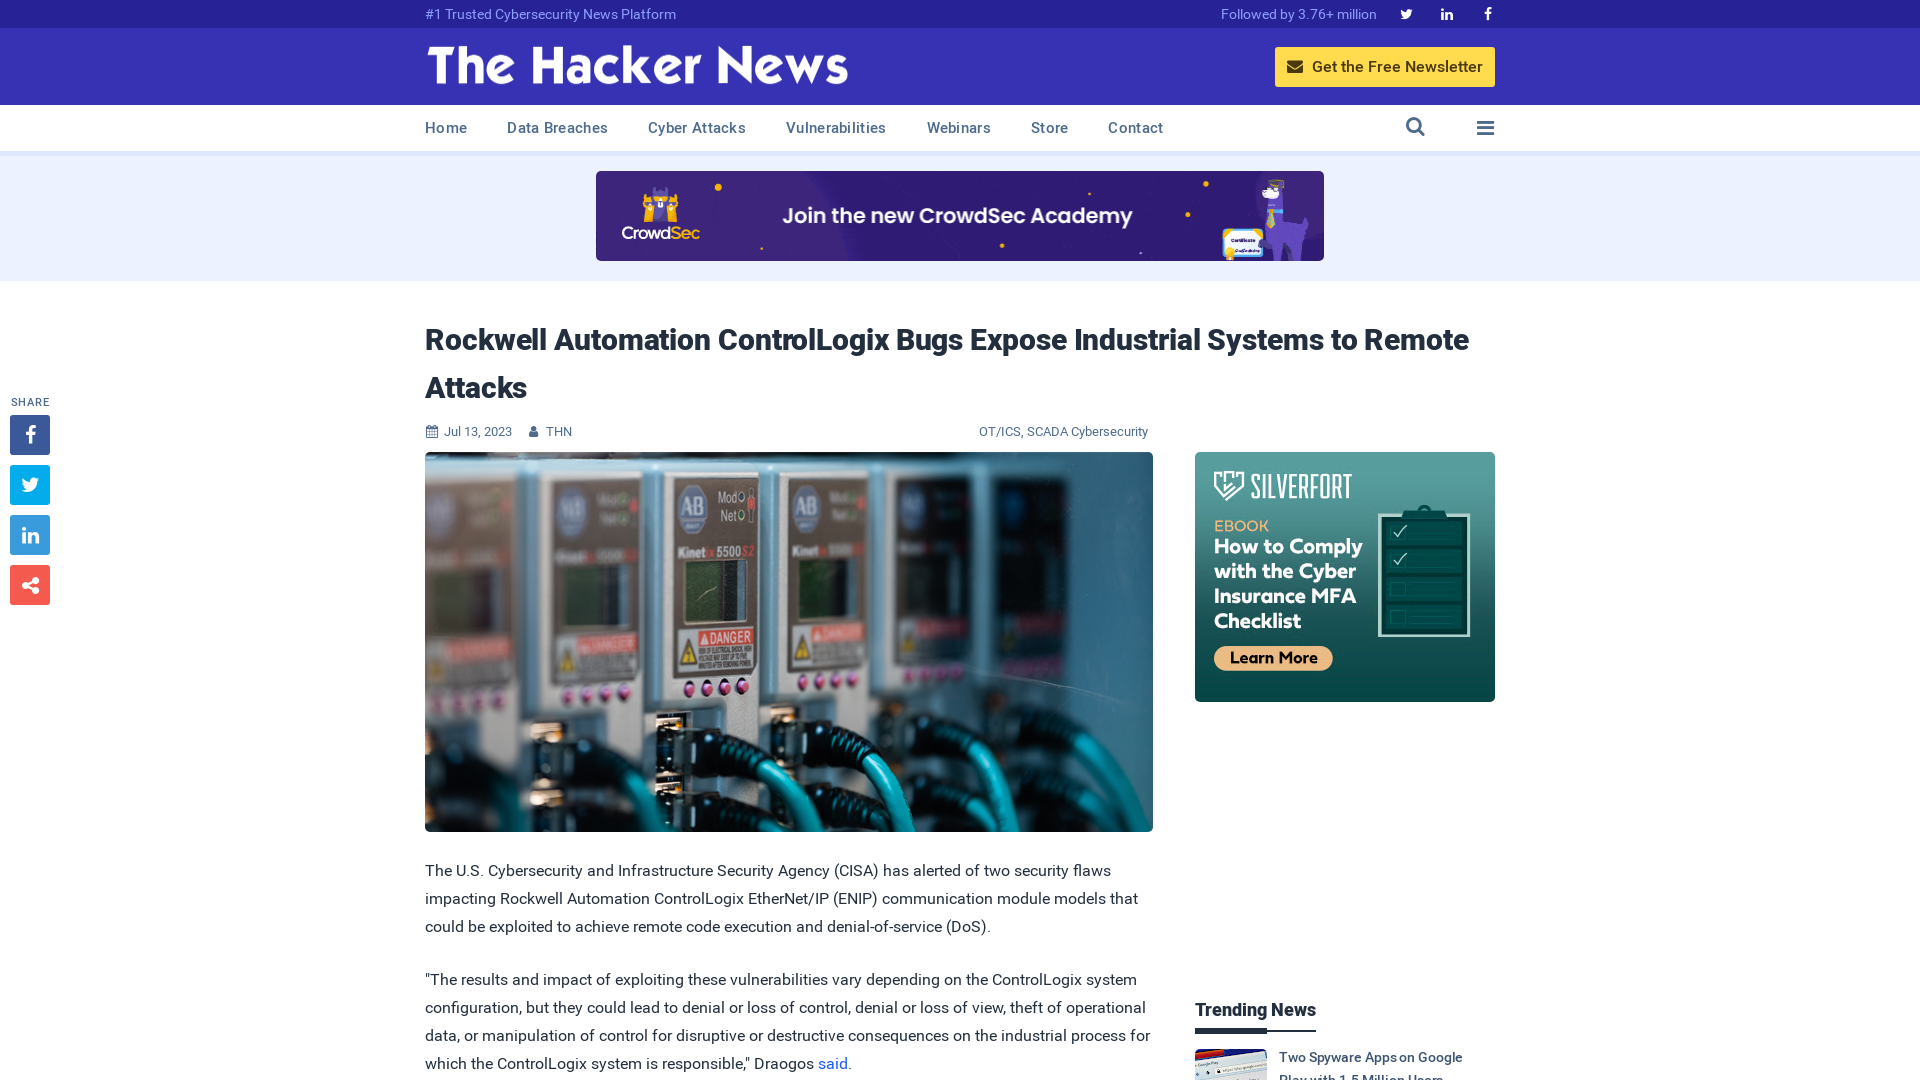 Rockwell Automation ControlLogix Bugs Expose Industrial Systems to Remote Attacks